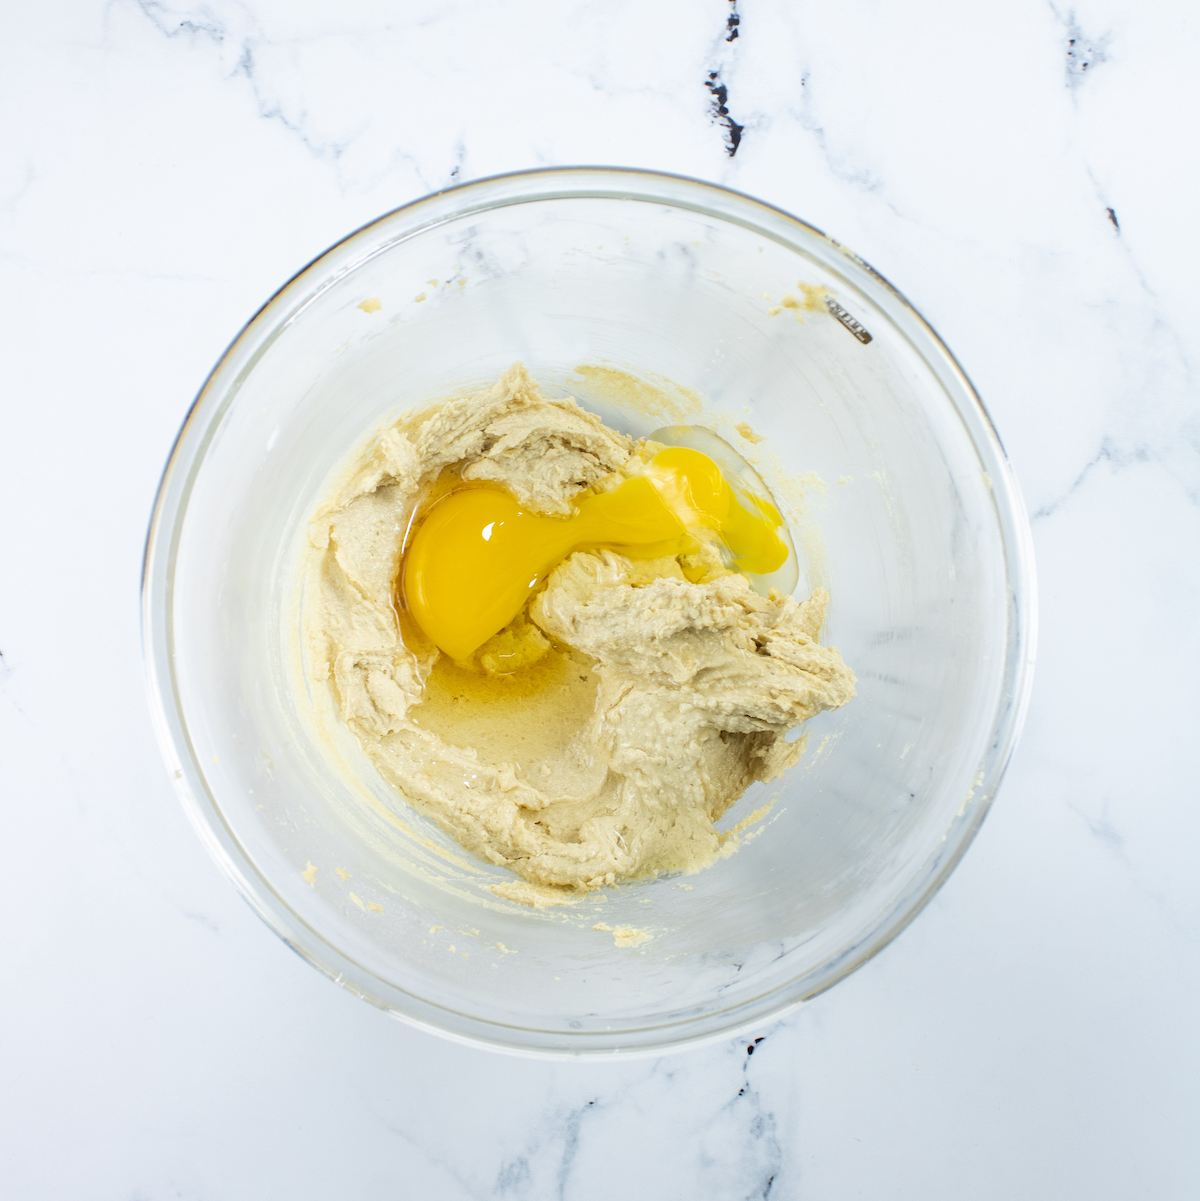 Egg and vanilla added to the cookie batter in a clear glass bowl